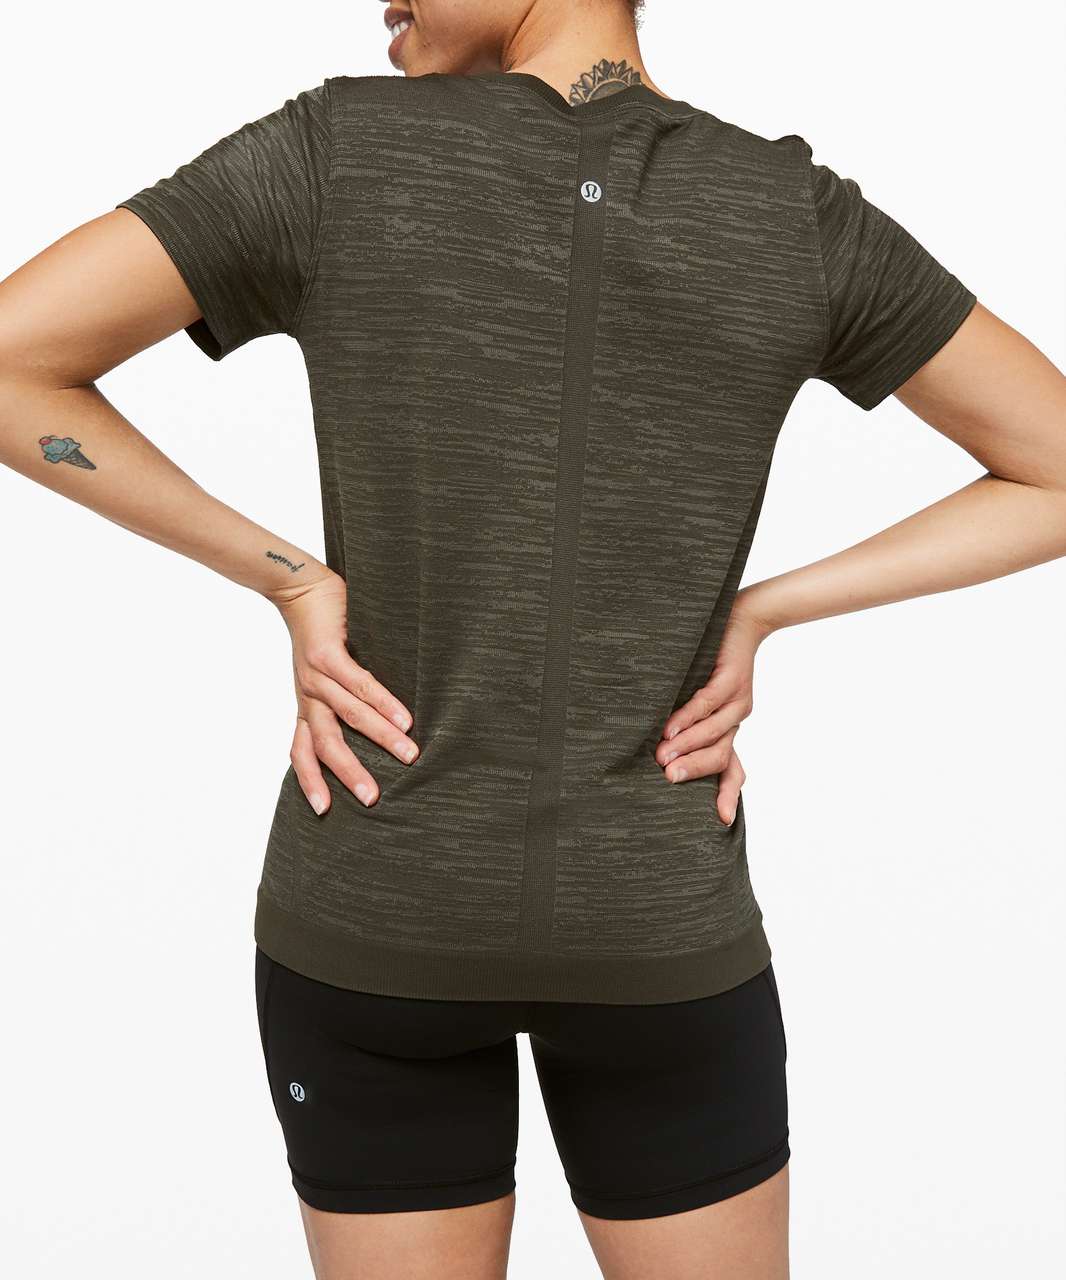 Lululemon Swiftly Tech Short Sleeve (Breeze) *Relaxed Fit - Dark Olive / Fatigue Green